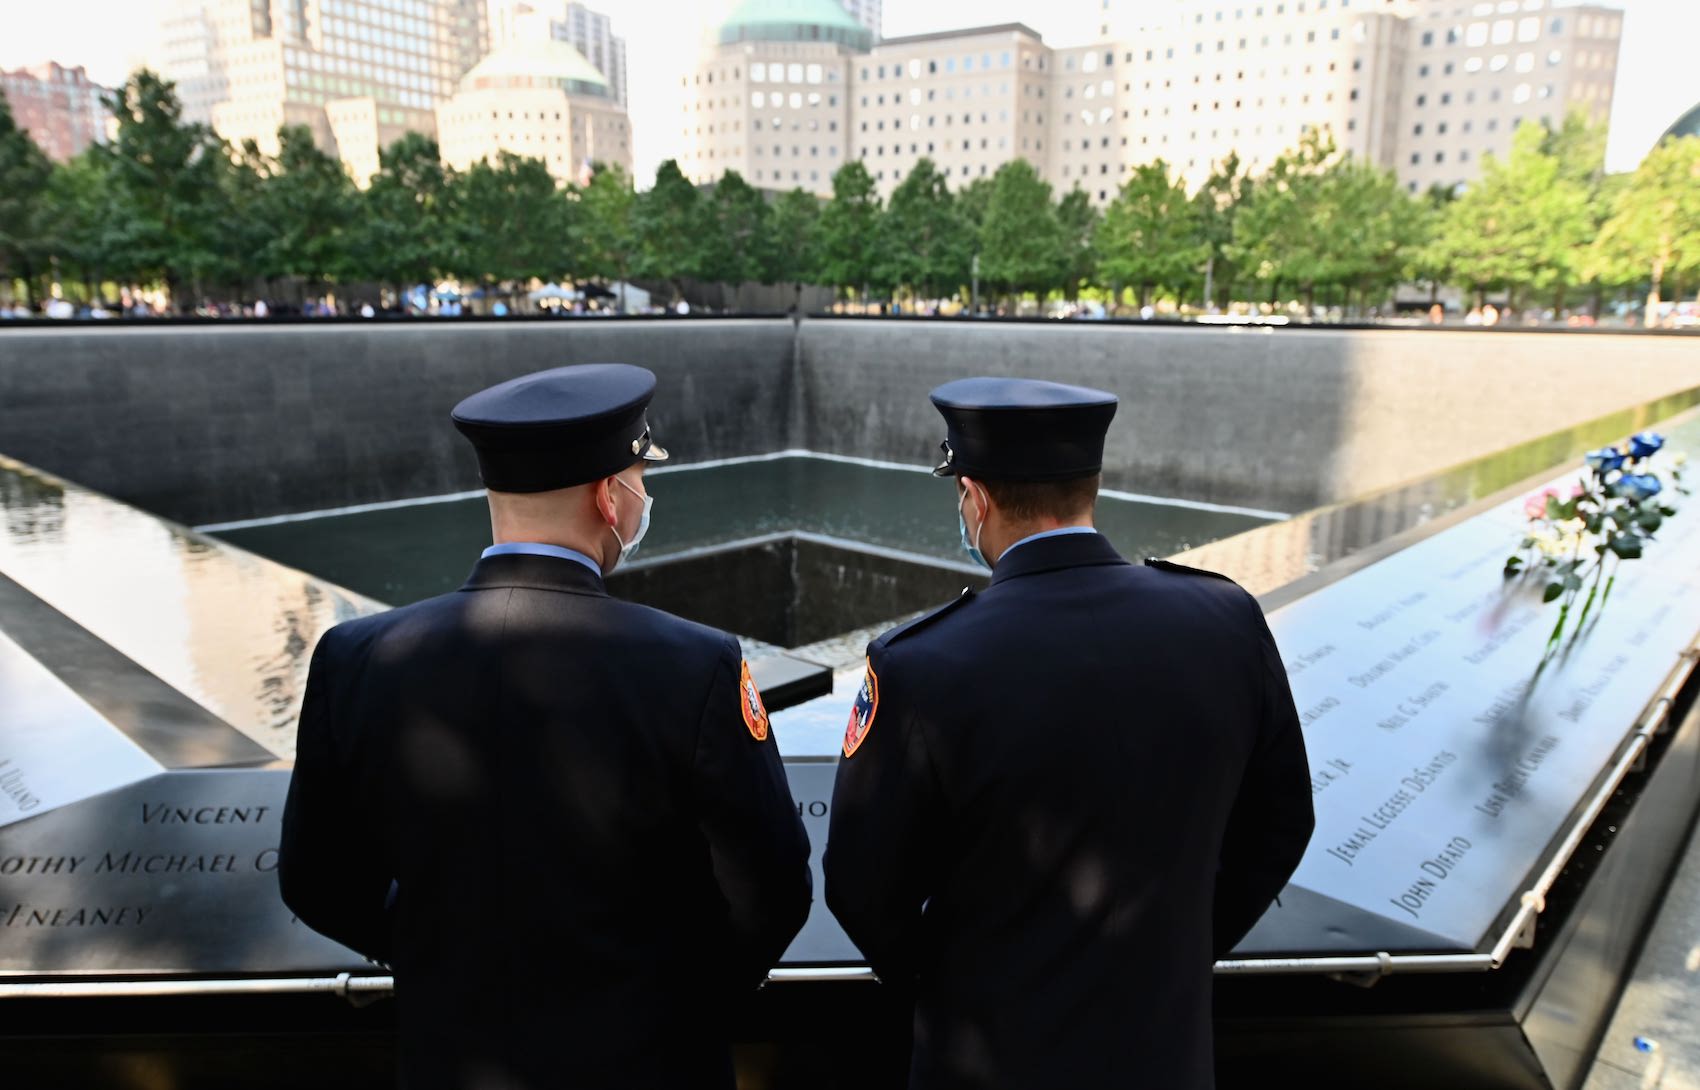 New York Firefighters gather at the 9/11 Memorial & Museum in New York on September 11, 2020, as the US commemorates the 19th anniversary of the 9/11 attacks